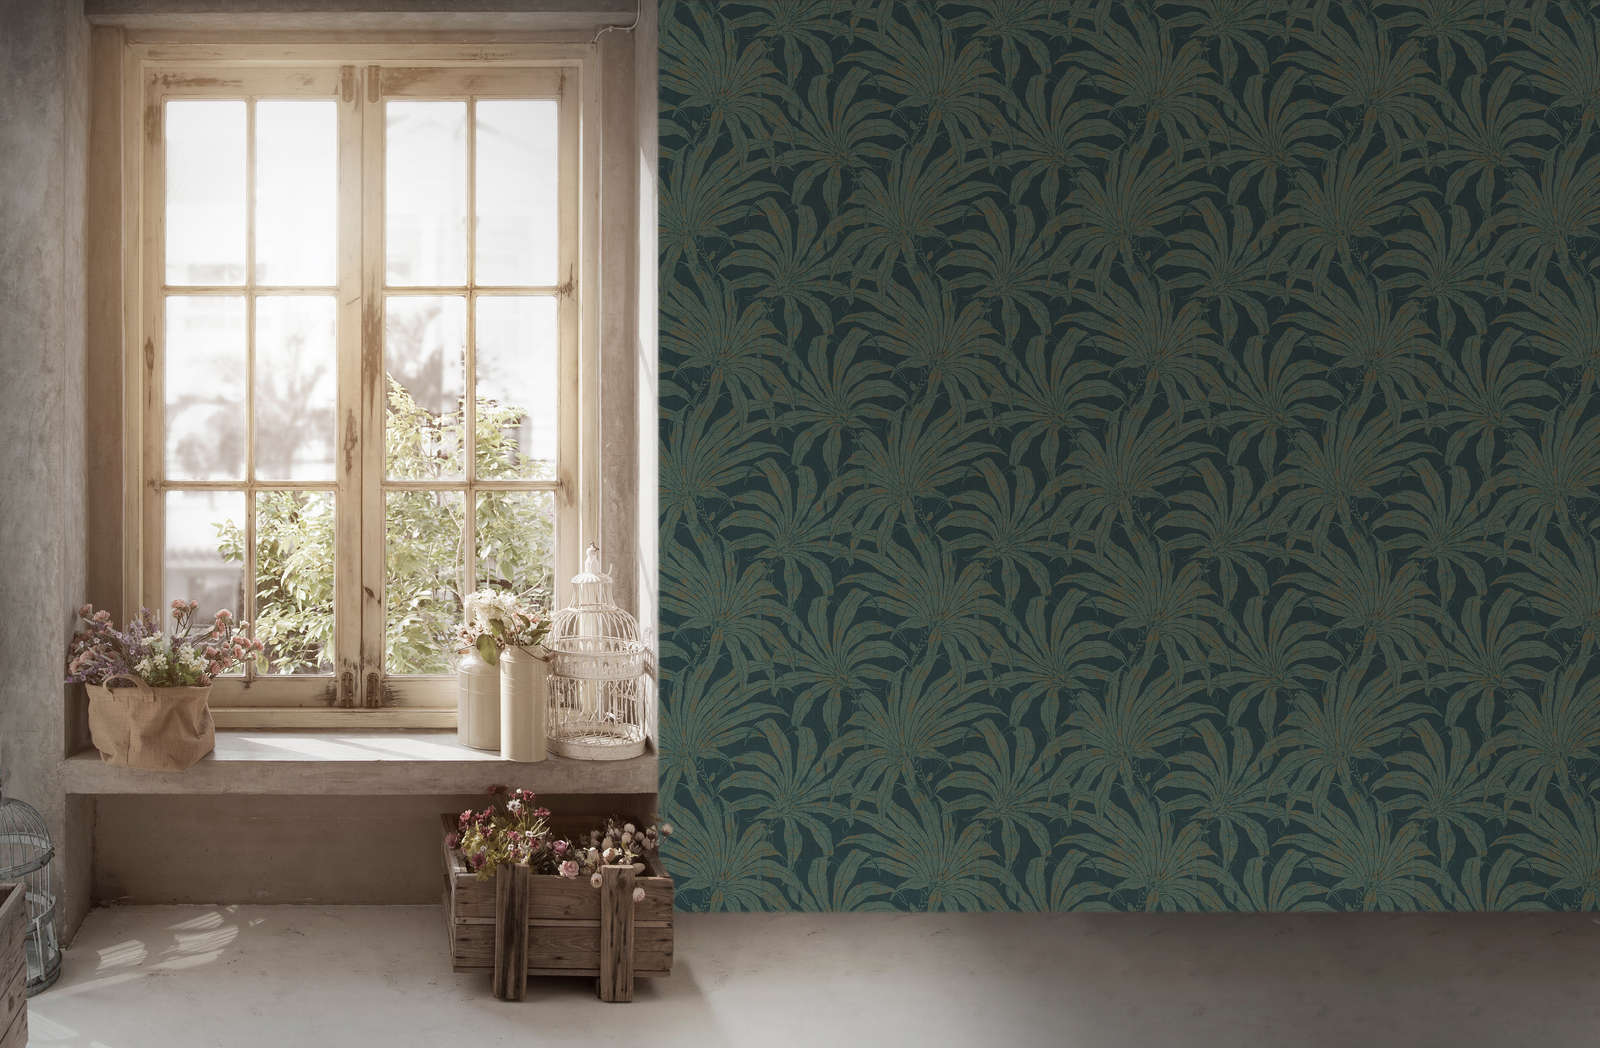             Floral pattern wallpaper with botanical jungle leaves - petrol, gold, blue
        